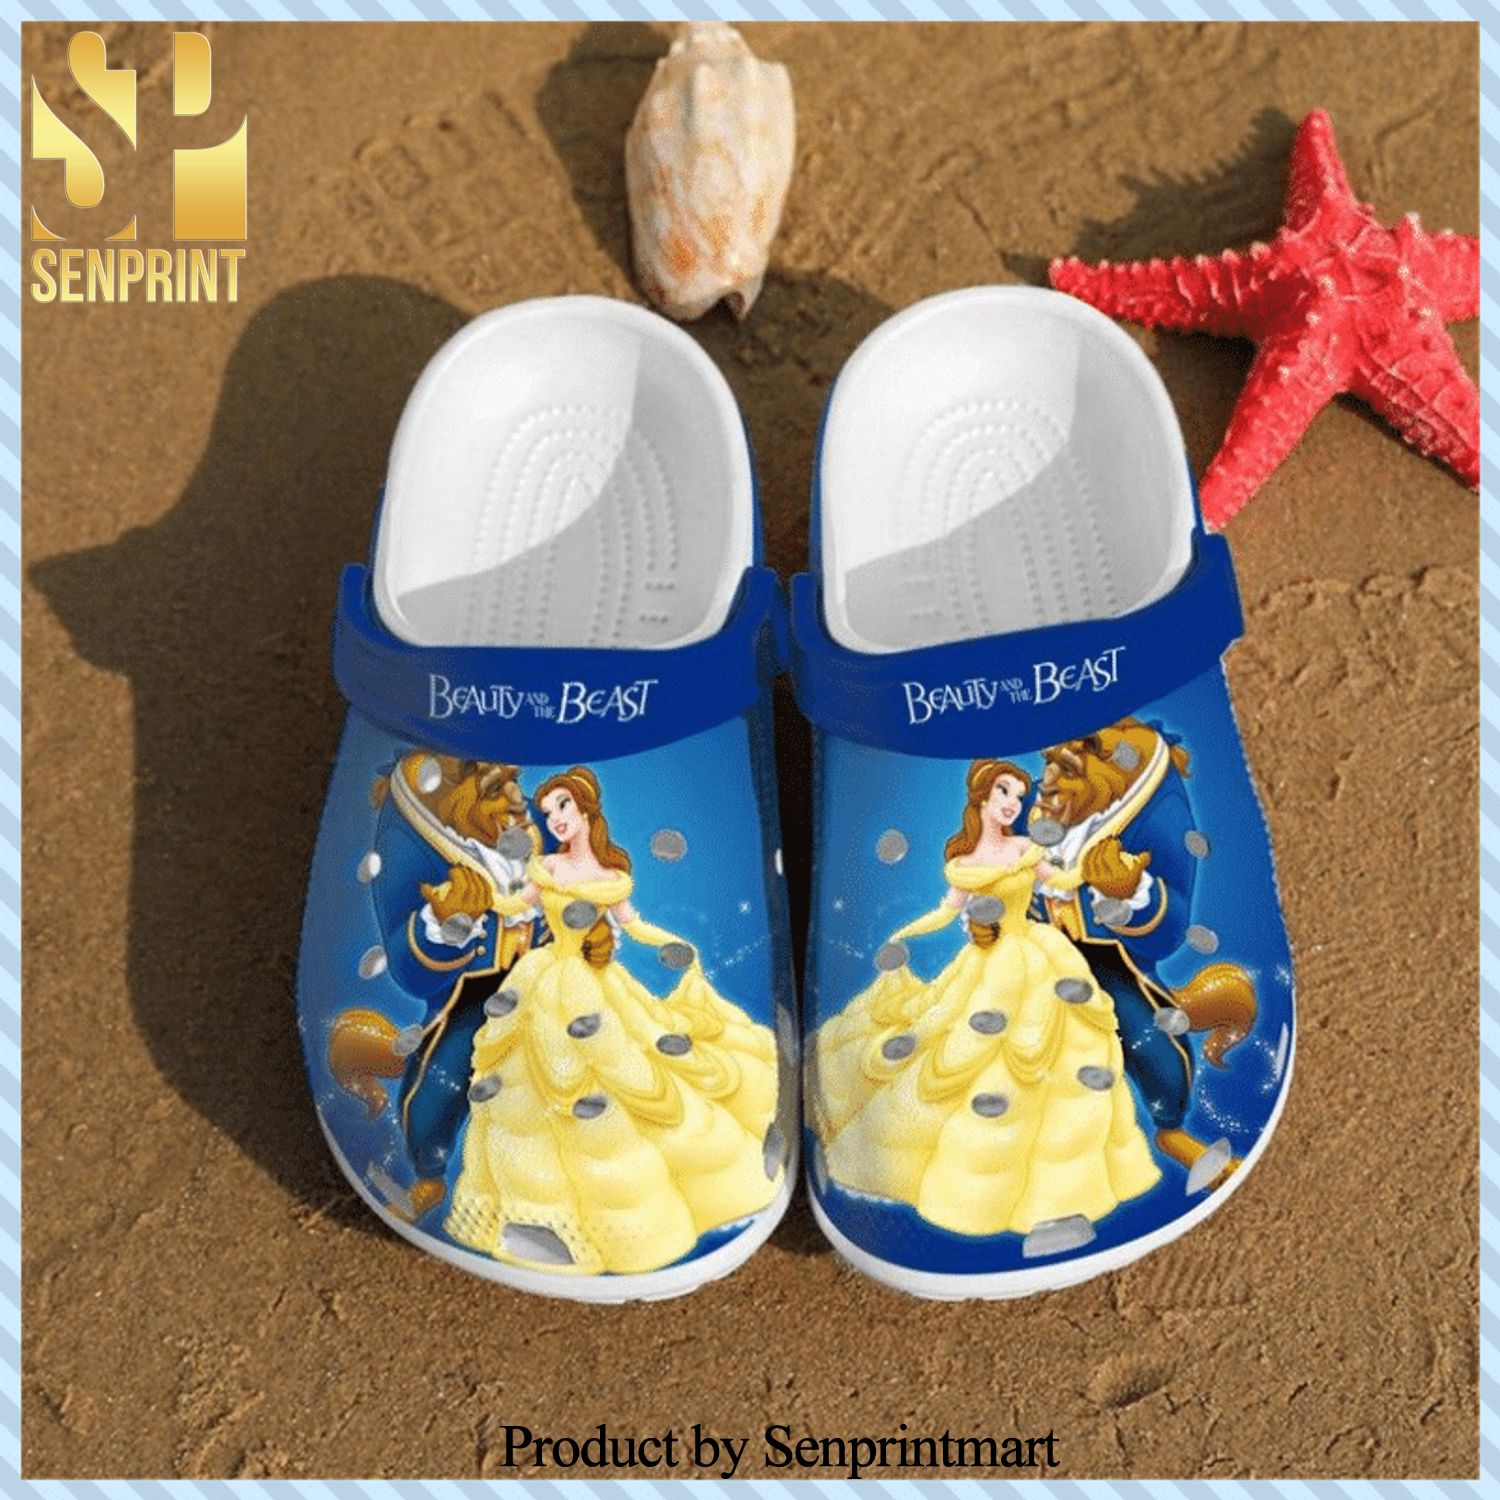 Beauty And The Beast Crocs Crocband For Men And Women All Over Printed Crocs Shoes